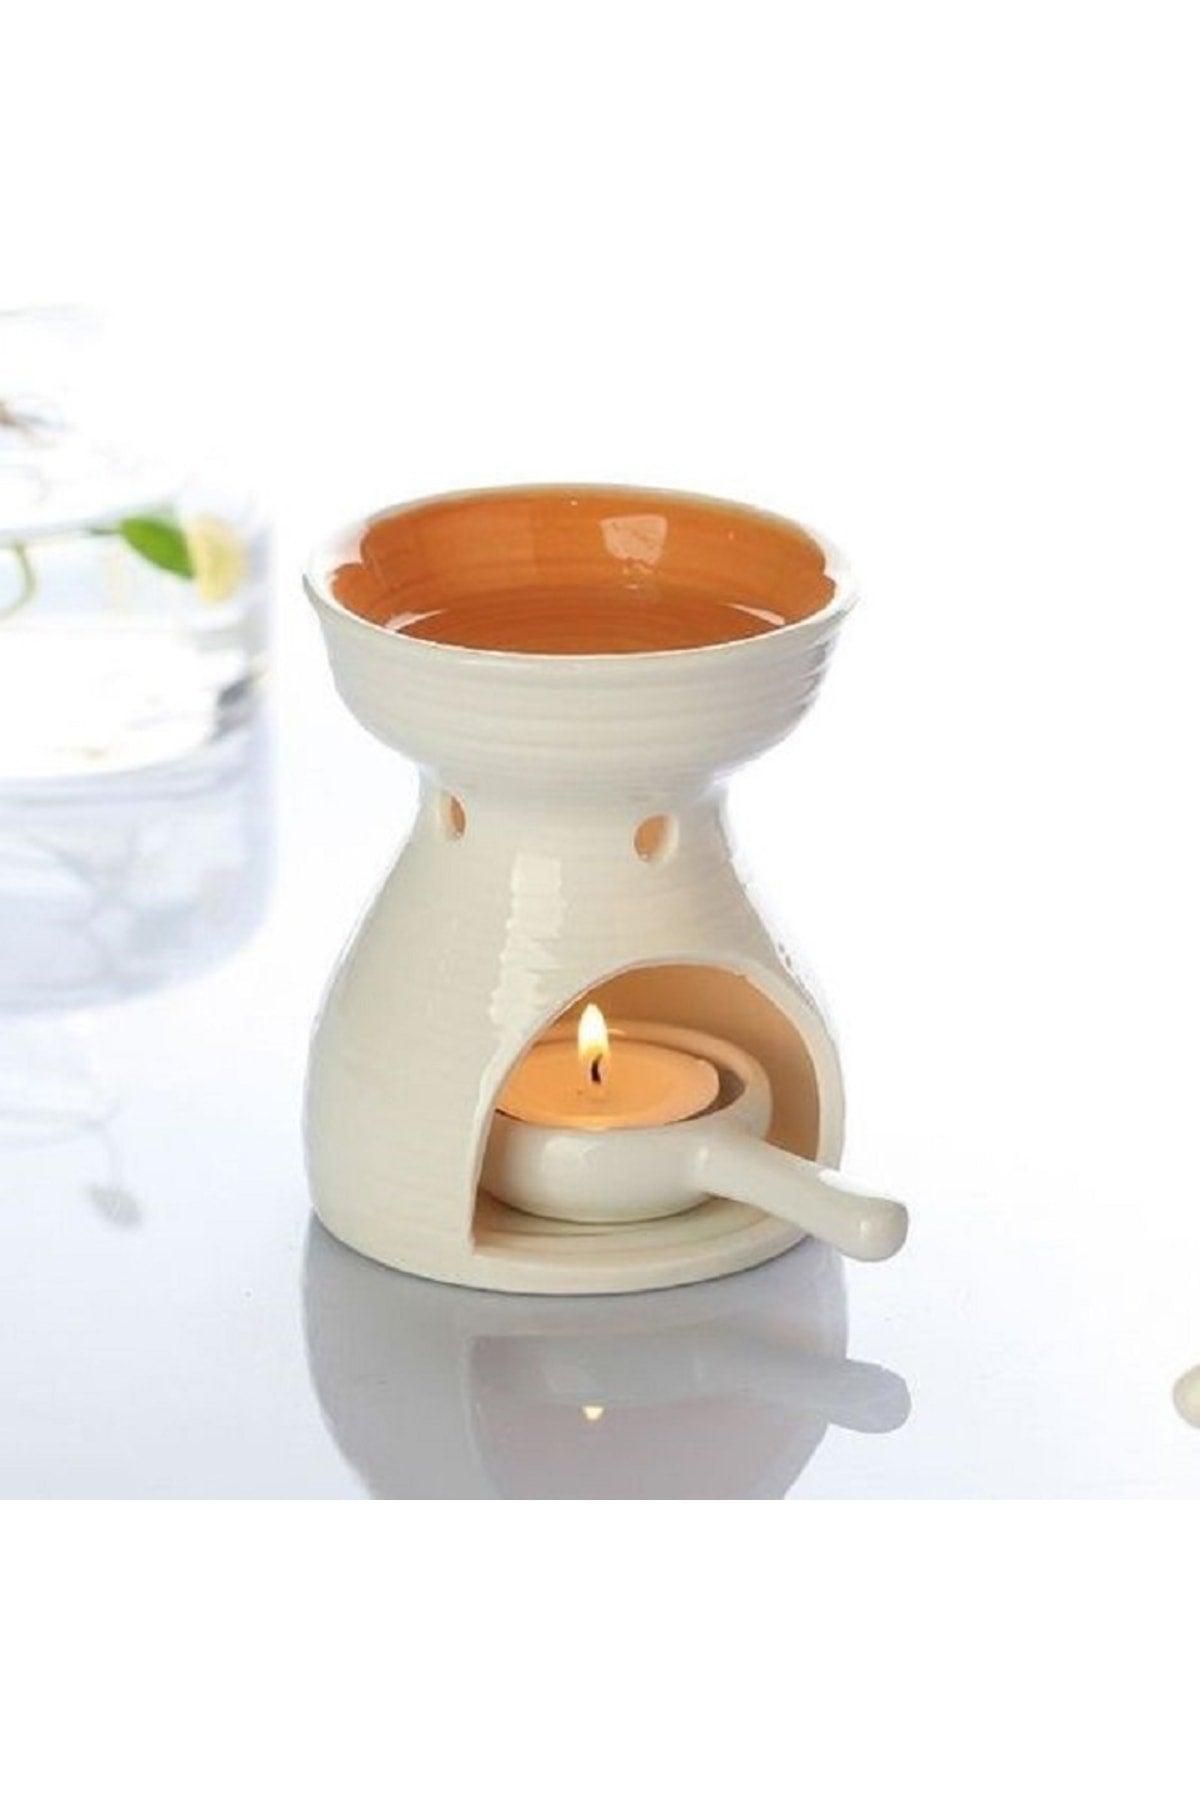 10 Pieces Censer Tealight Candle (Specially Produced for Censer) Burns for 4 hours and 25 minutes - Swordslife